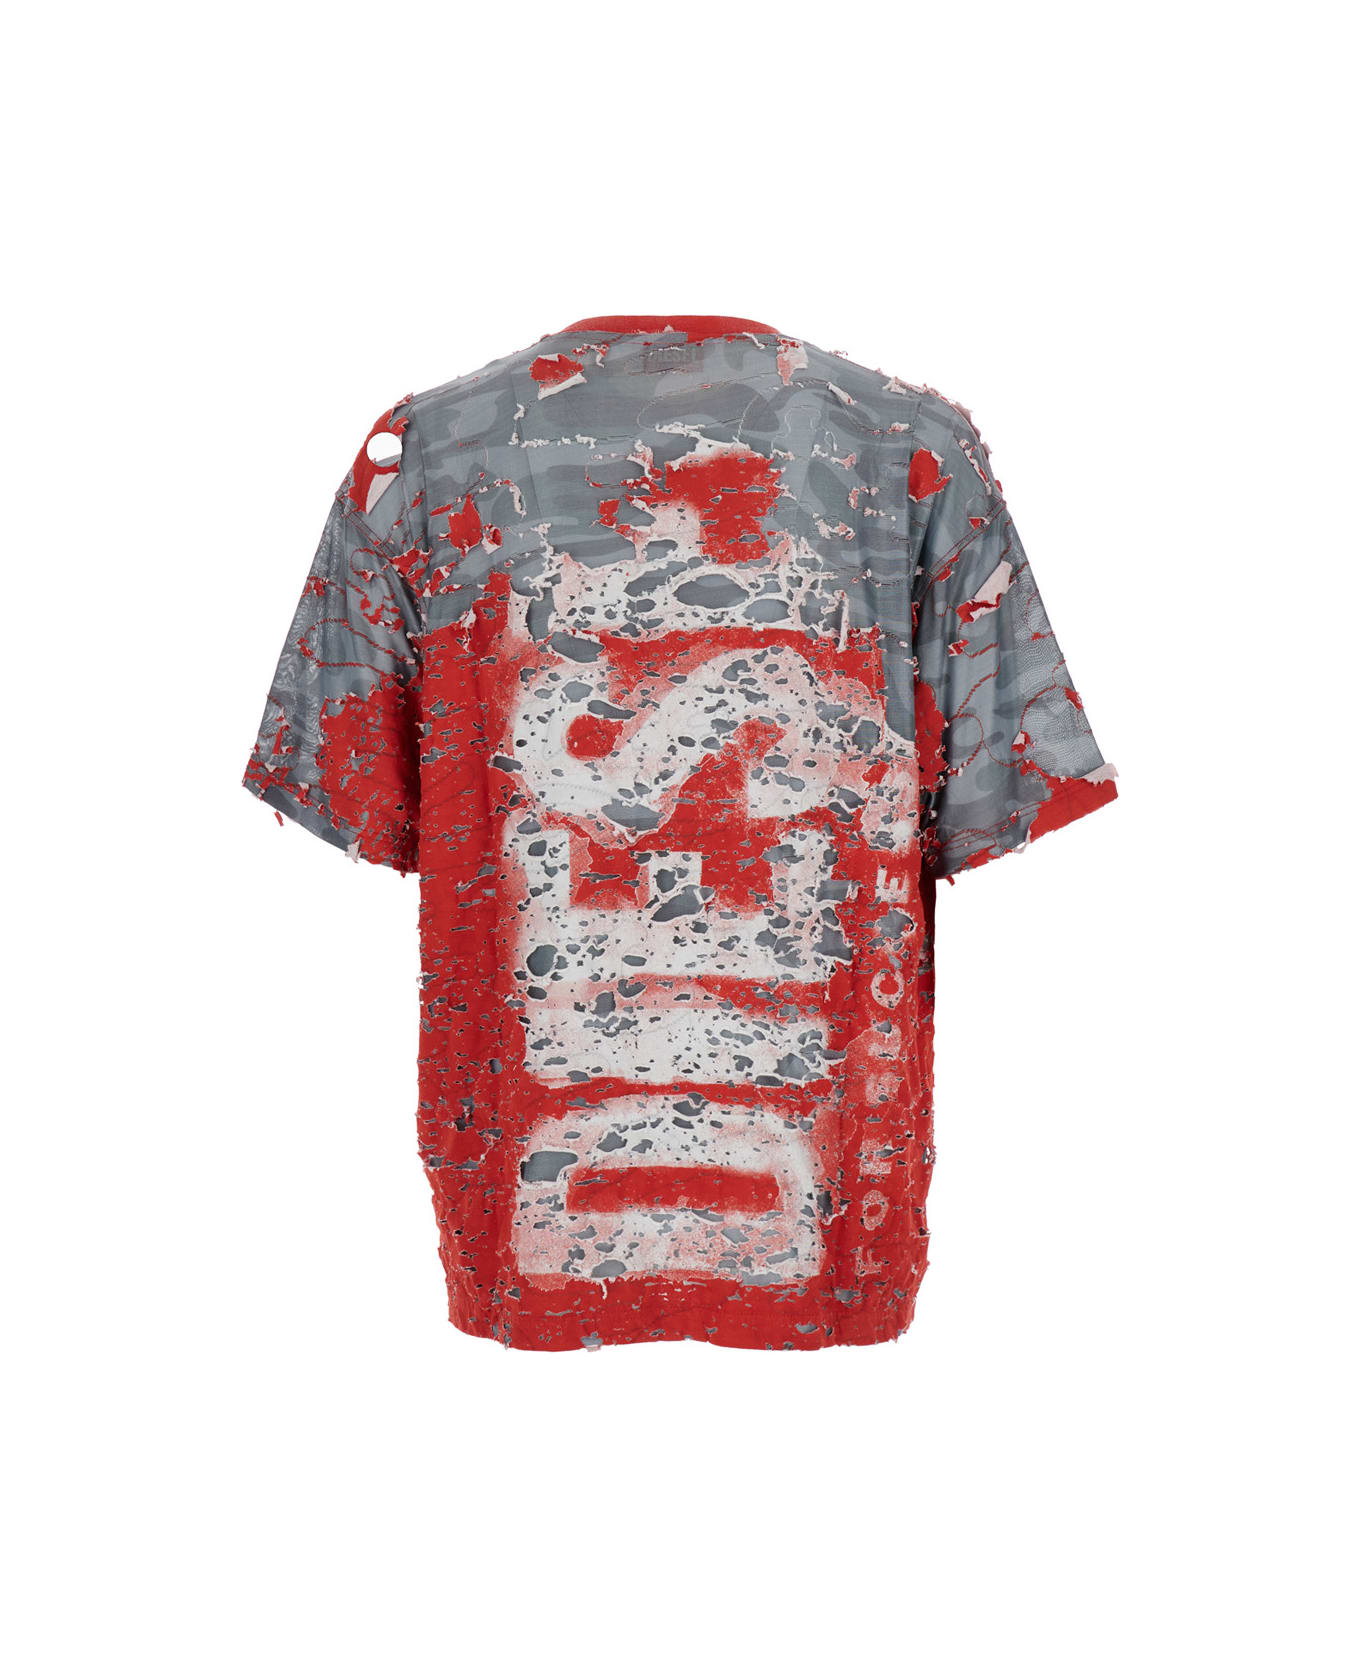 Diesel 't-boxt-peel' Red And Grey T-shirt With Destroyed Effect And Camouflage Print In Cotton Blend Man - Multicolor